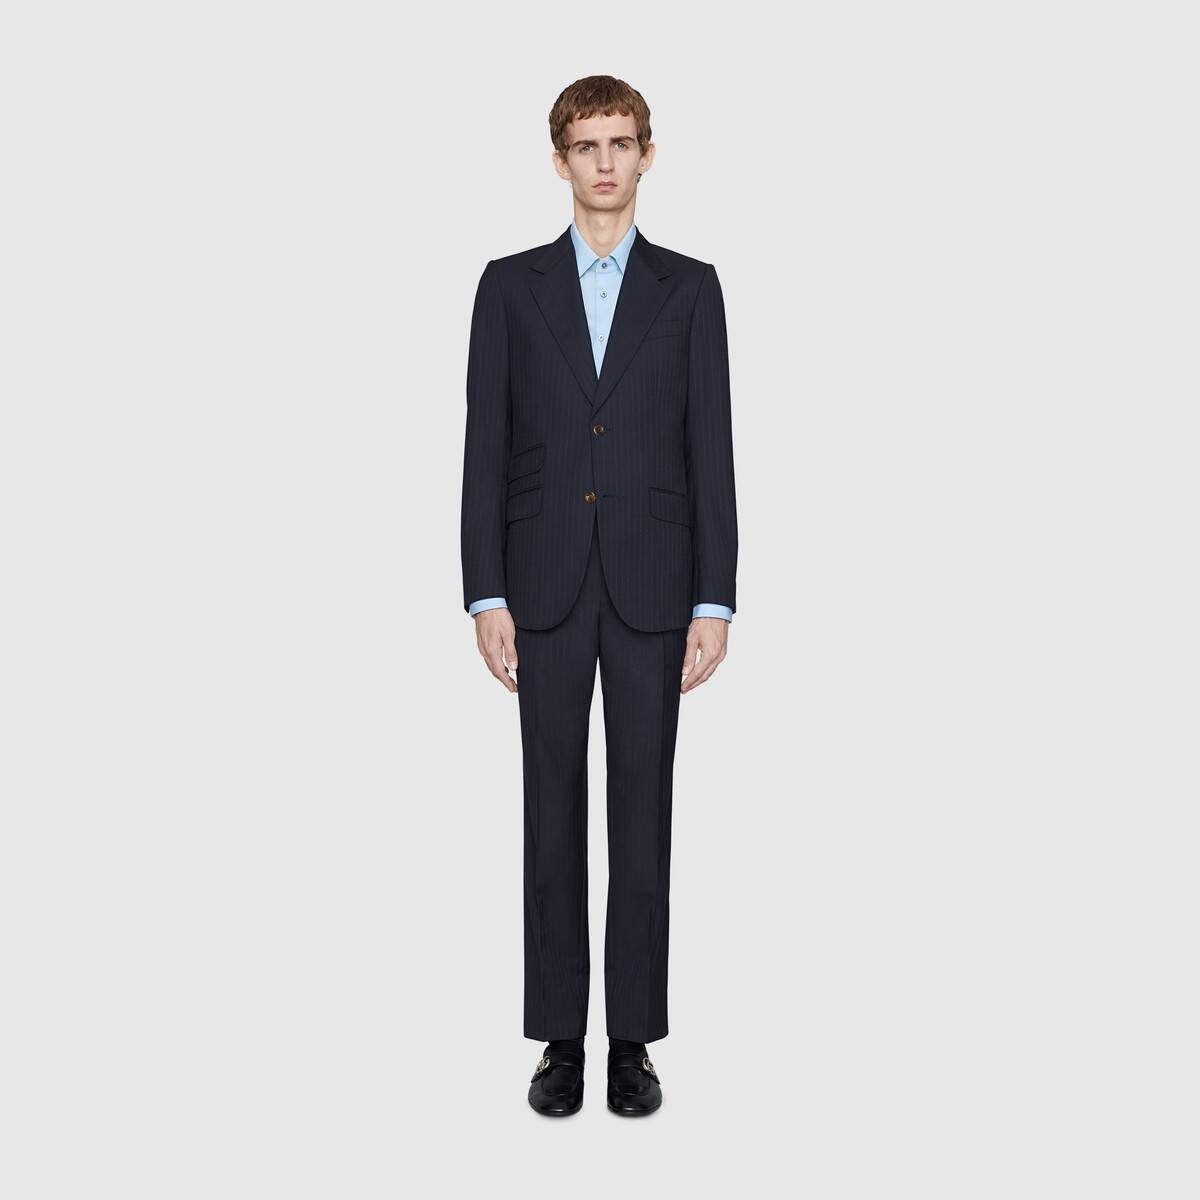 Fitted Gucci pinstripe suit - 3